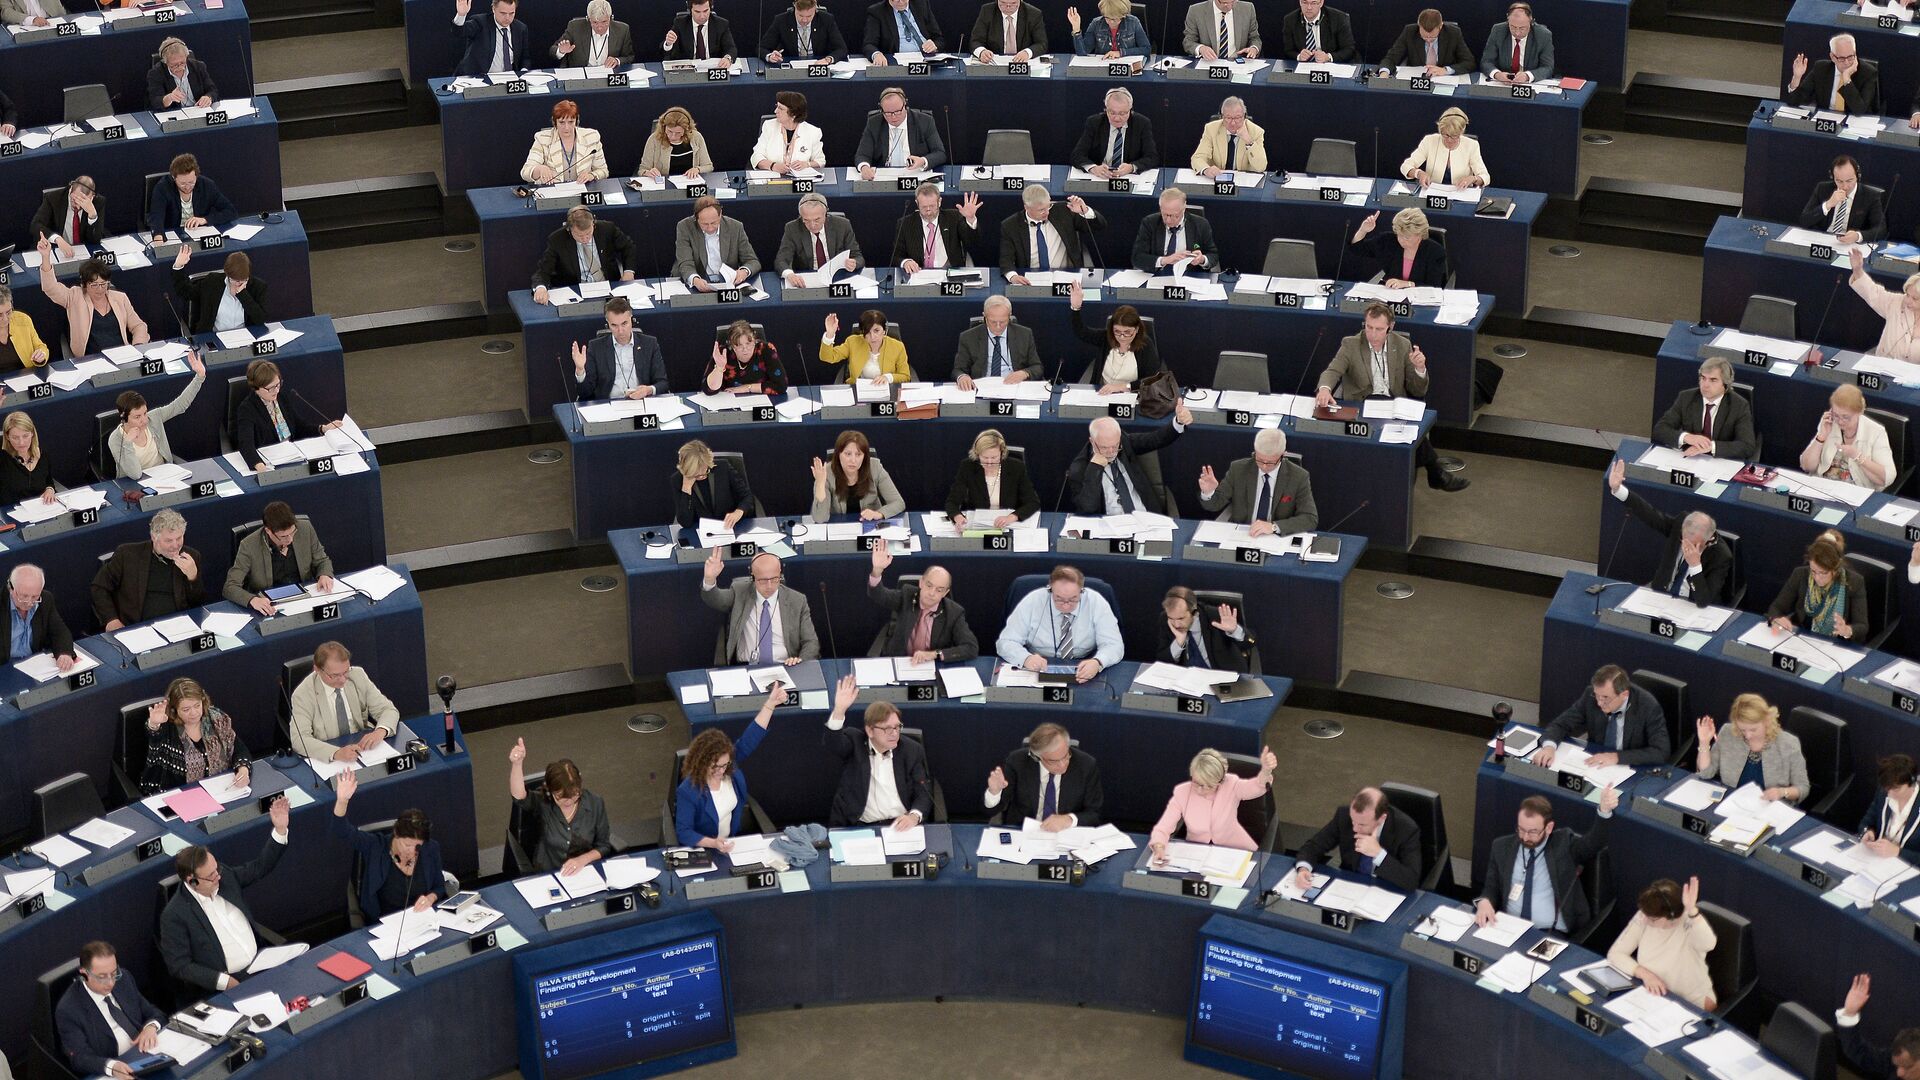 Members of the European Parliament take part in a voting session on May 19, 2015, in the European Parliament in Strasbourg, eastern France - Sputnik Afrique, 1920, 20.01.2022